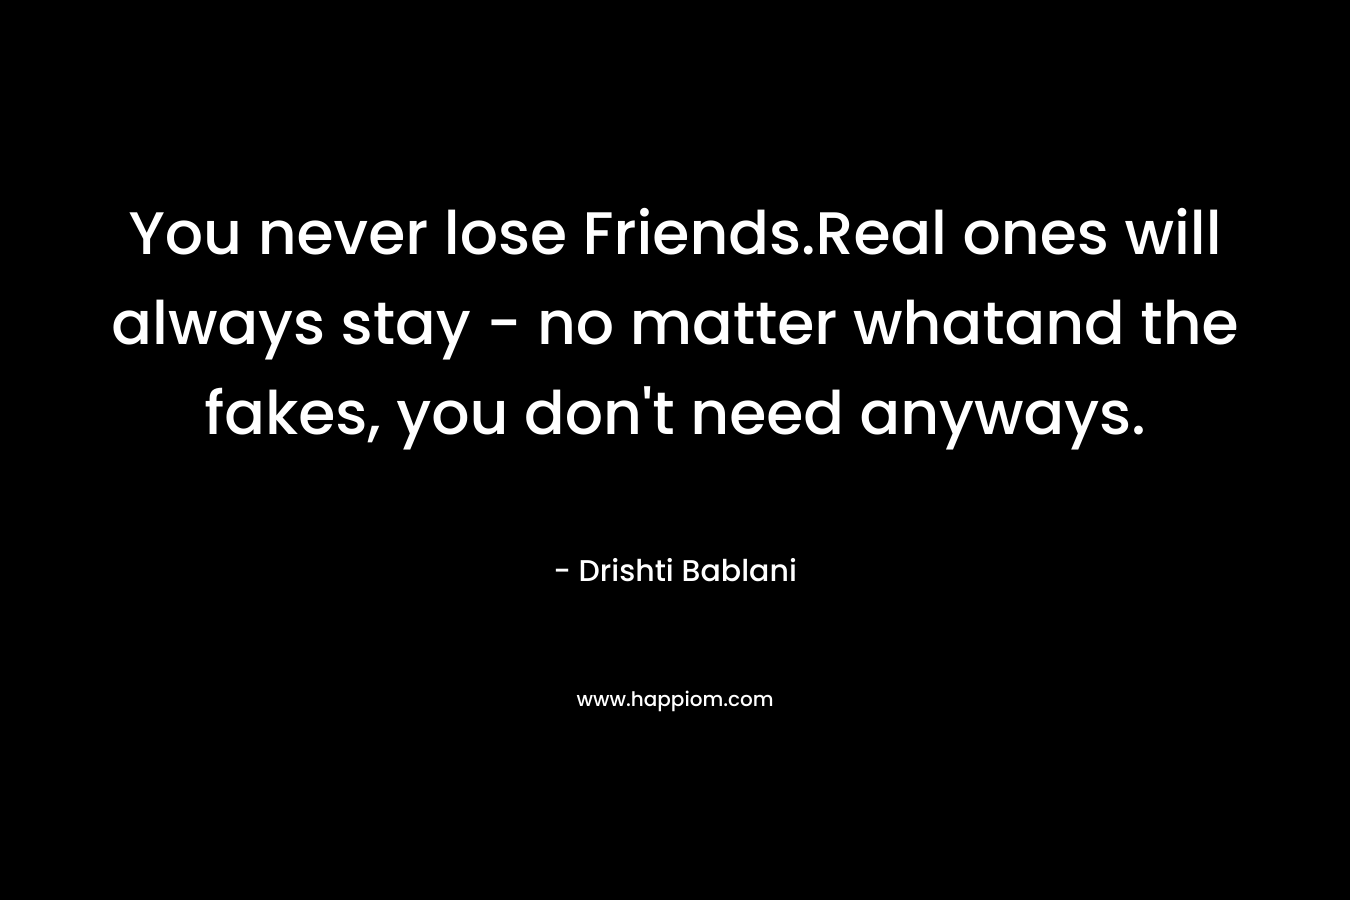 You never lose Friends.Real ones will always stay – no matter whatand the fakes, you don’t need anyways. – Drishti Bablani